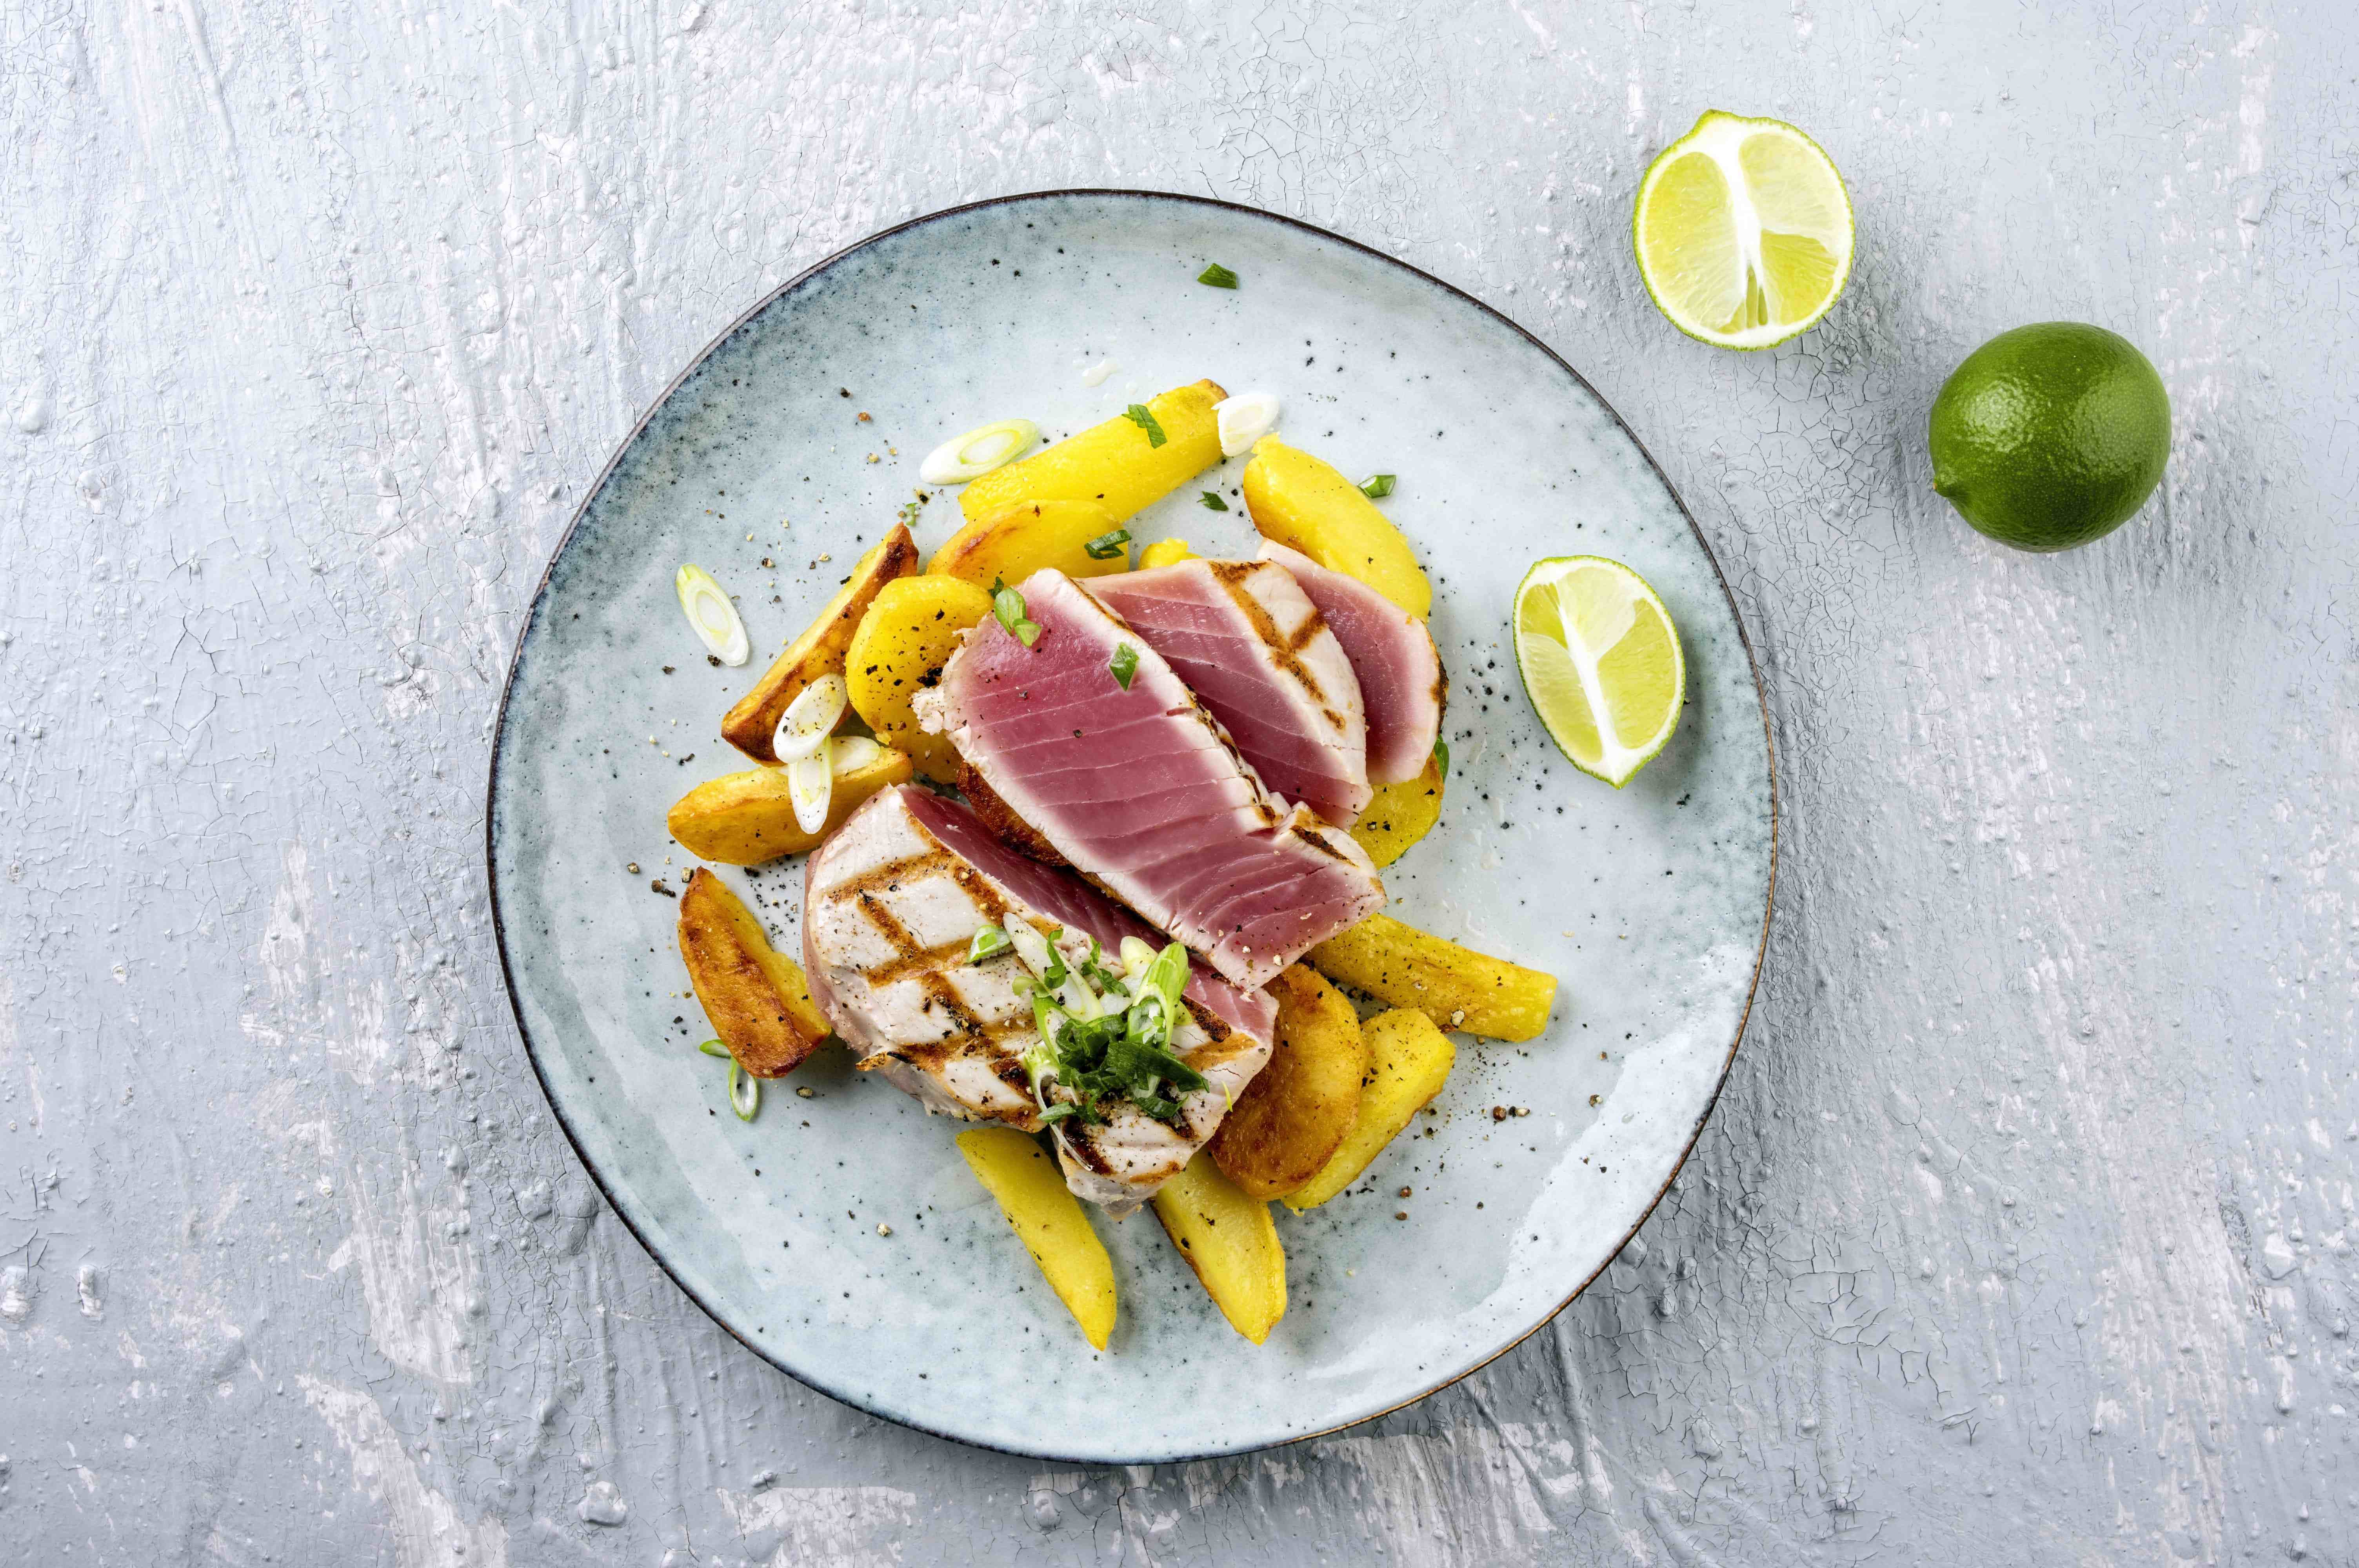 Tuna fillet and chips